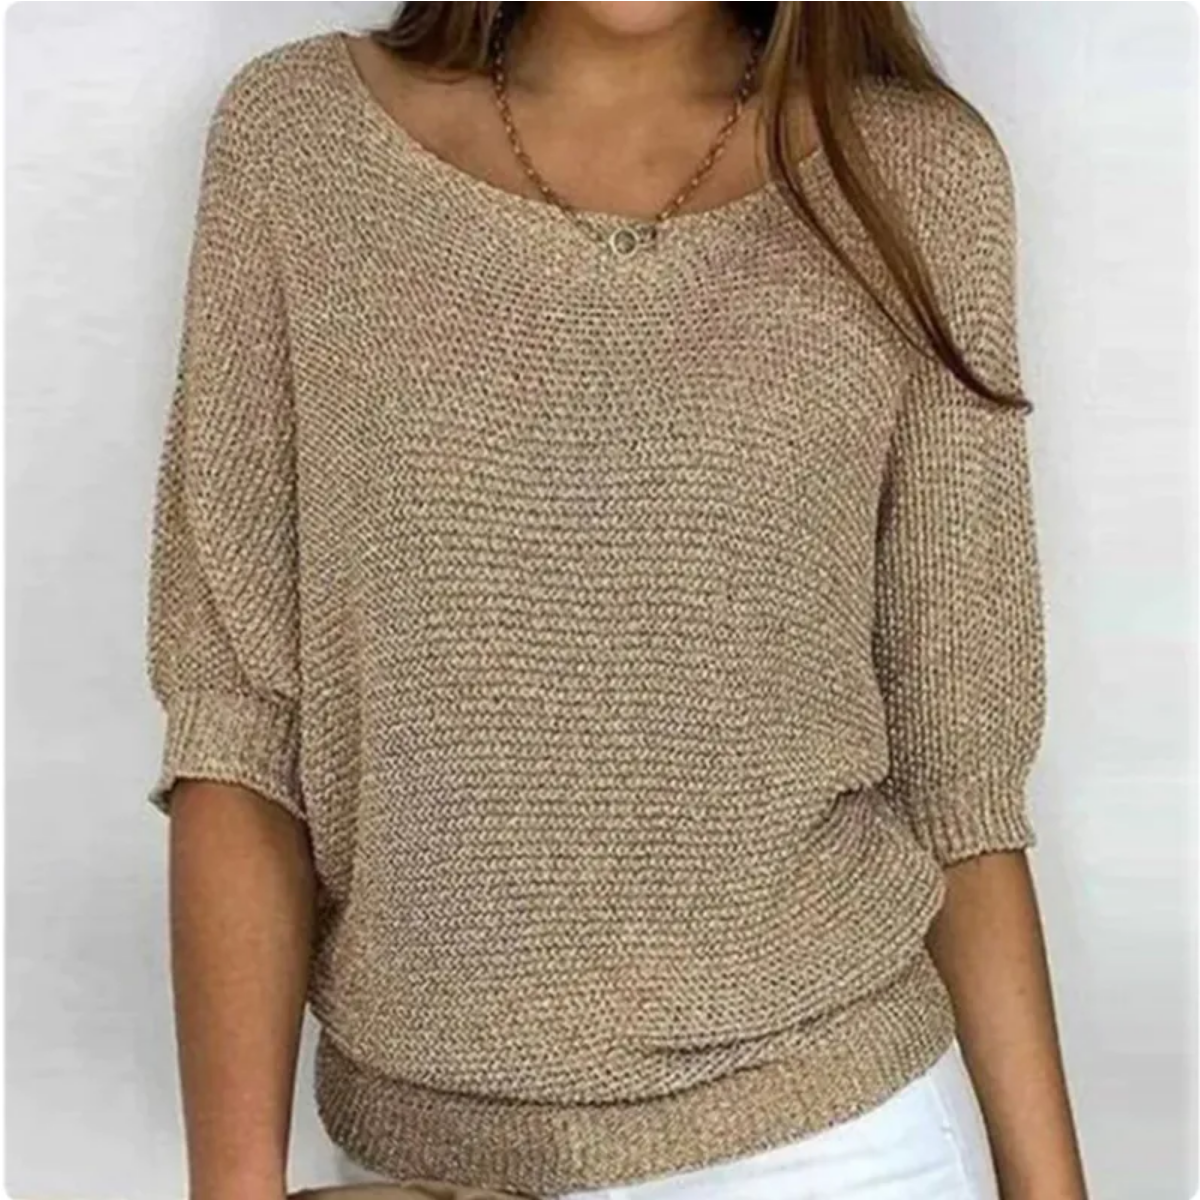 Primary image for Three Quarter Sleeve Sweater